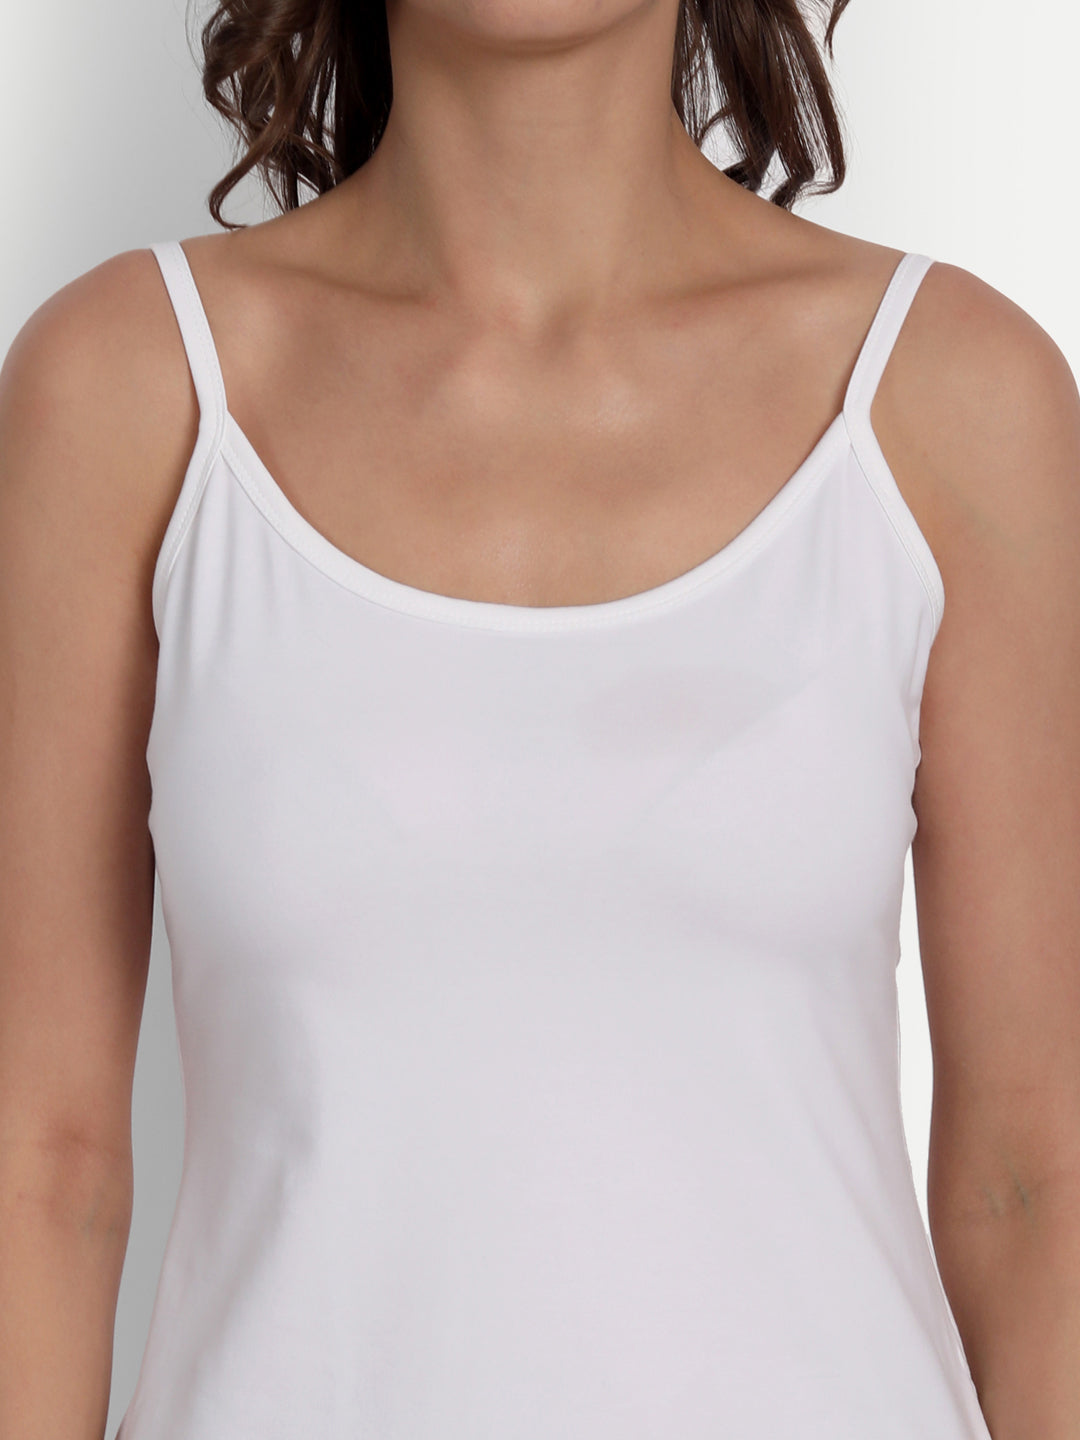 Cotton Lycra Camisole Vest Top Inner Wear Camis with Adjustable